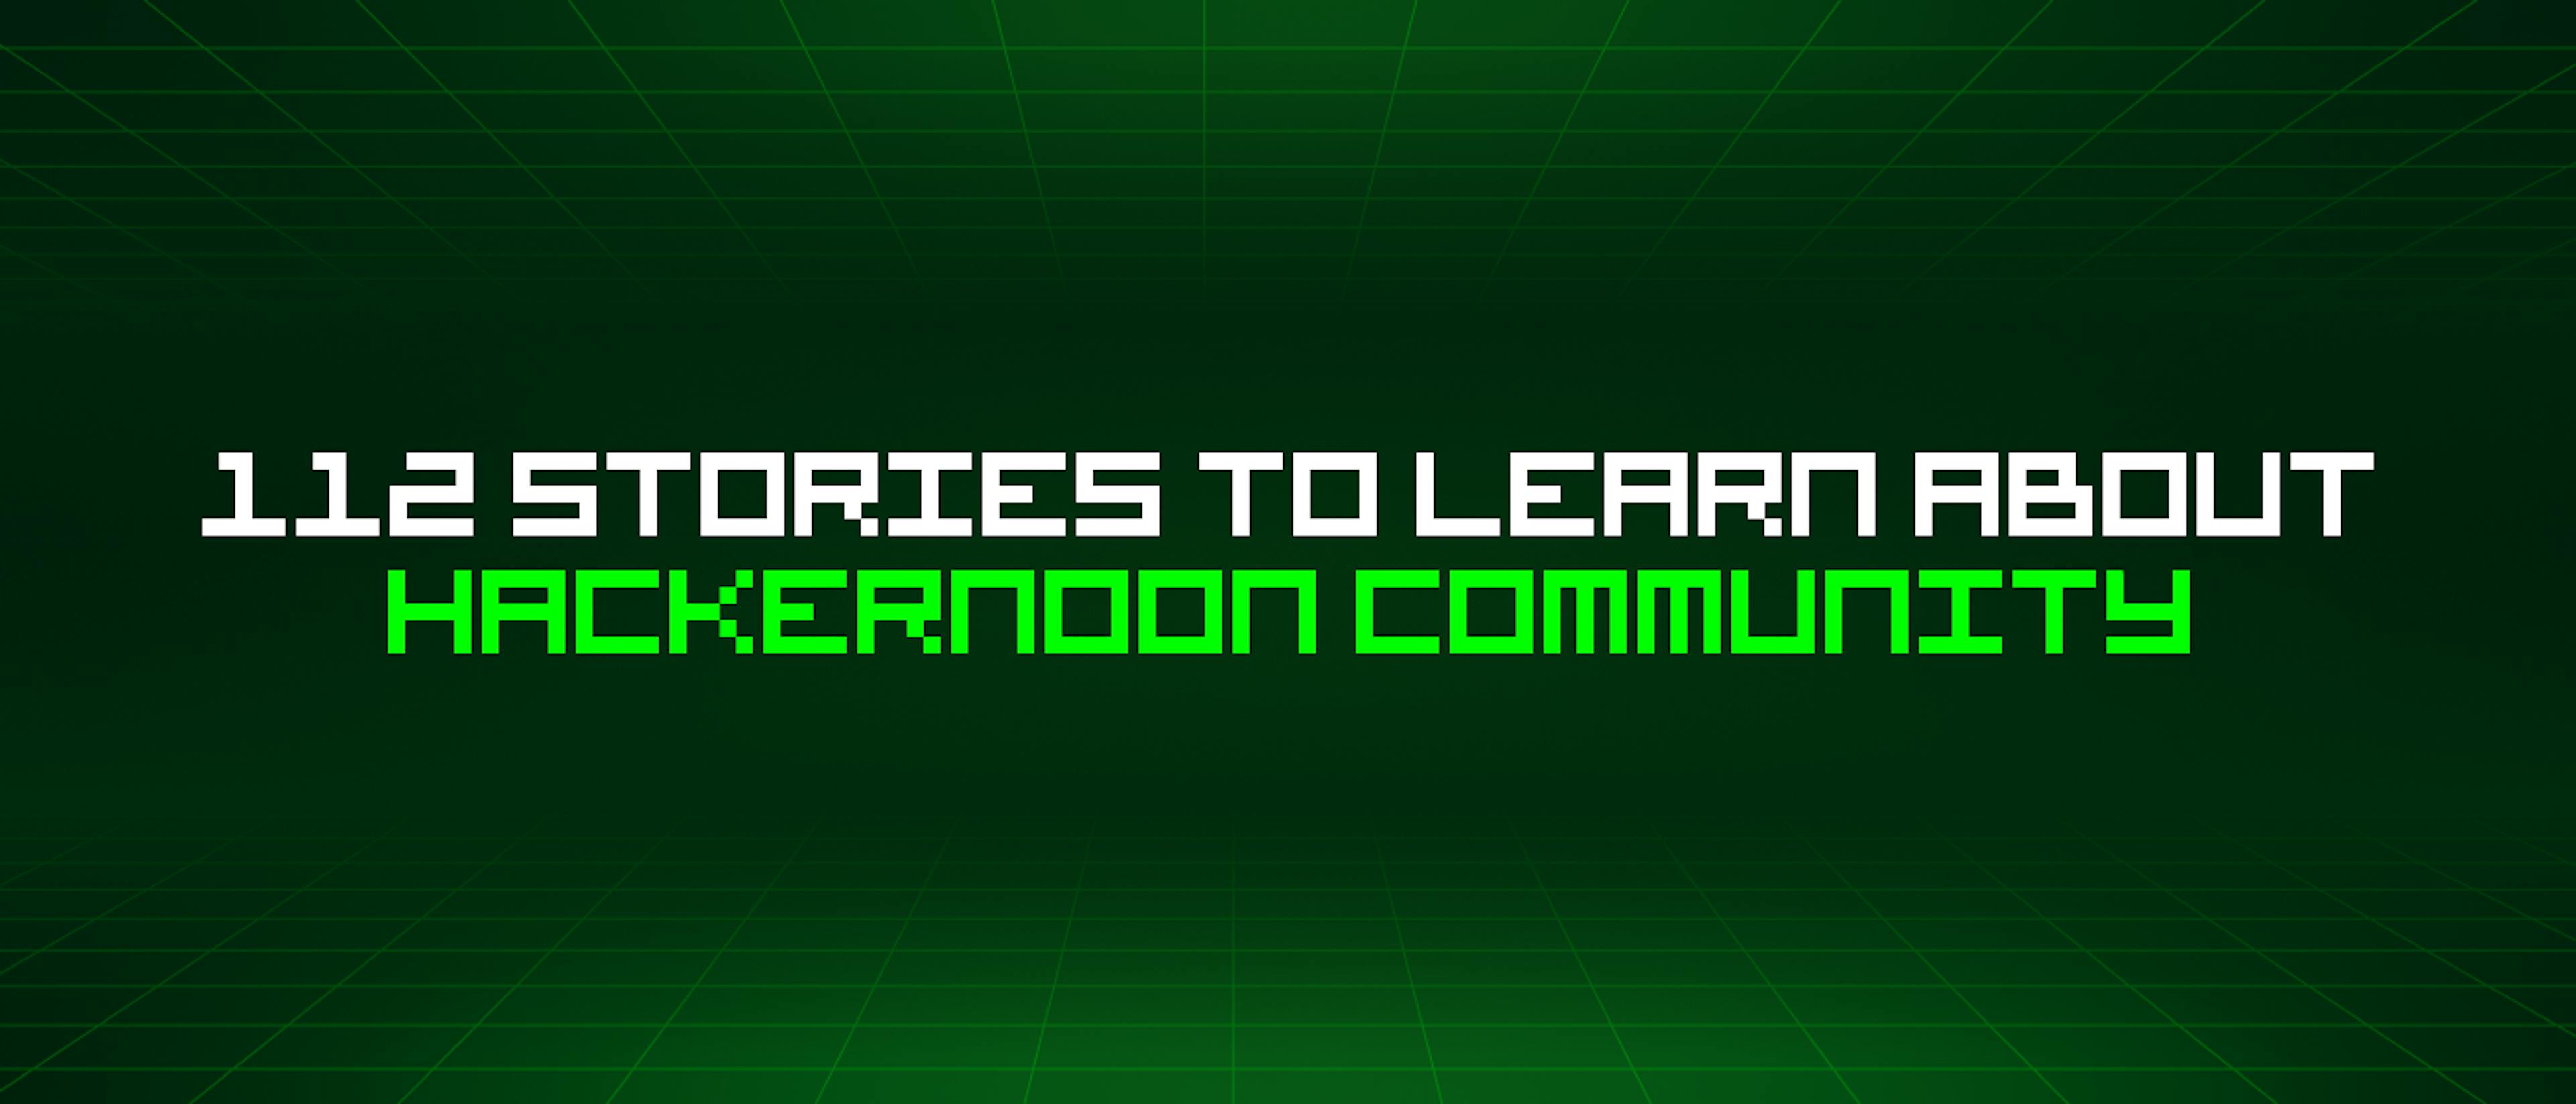 featured image - 112 Stories To Learn About Hackernoon Community